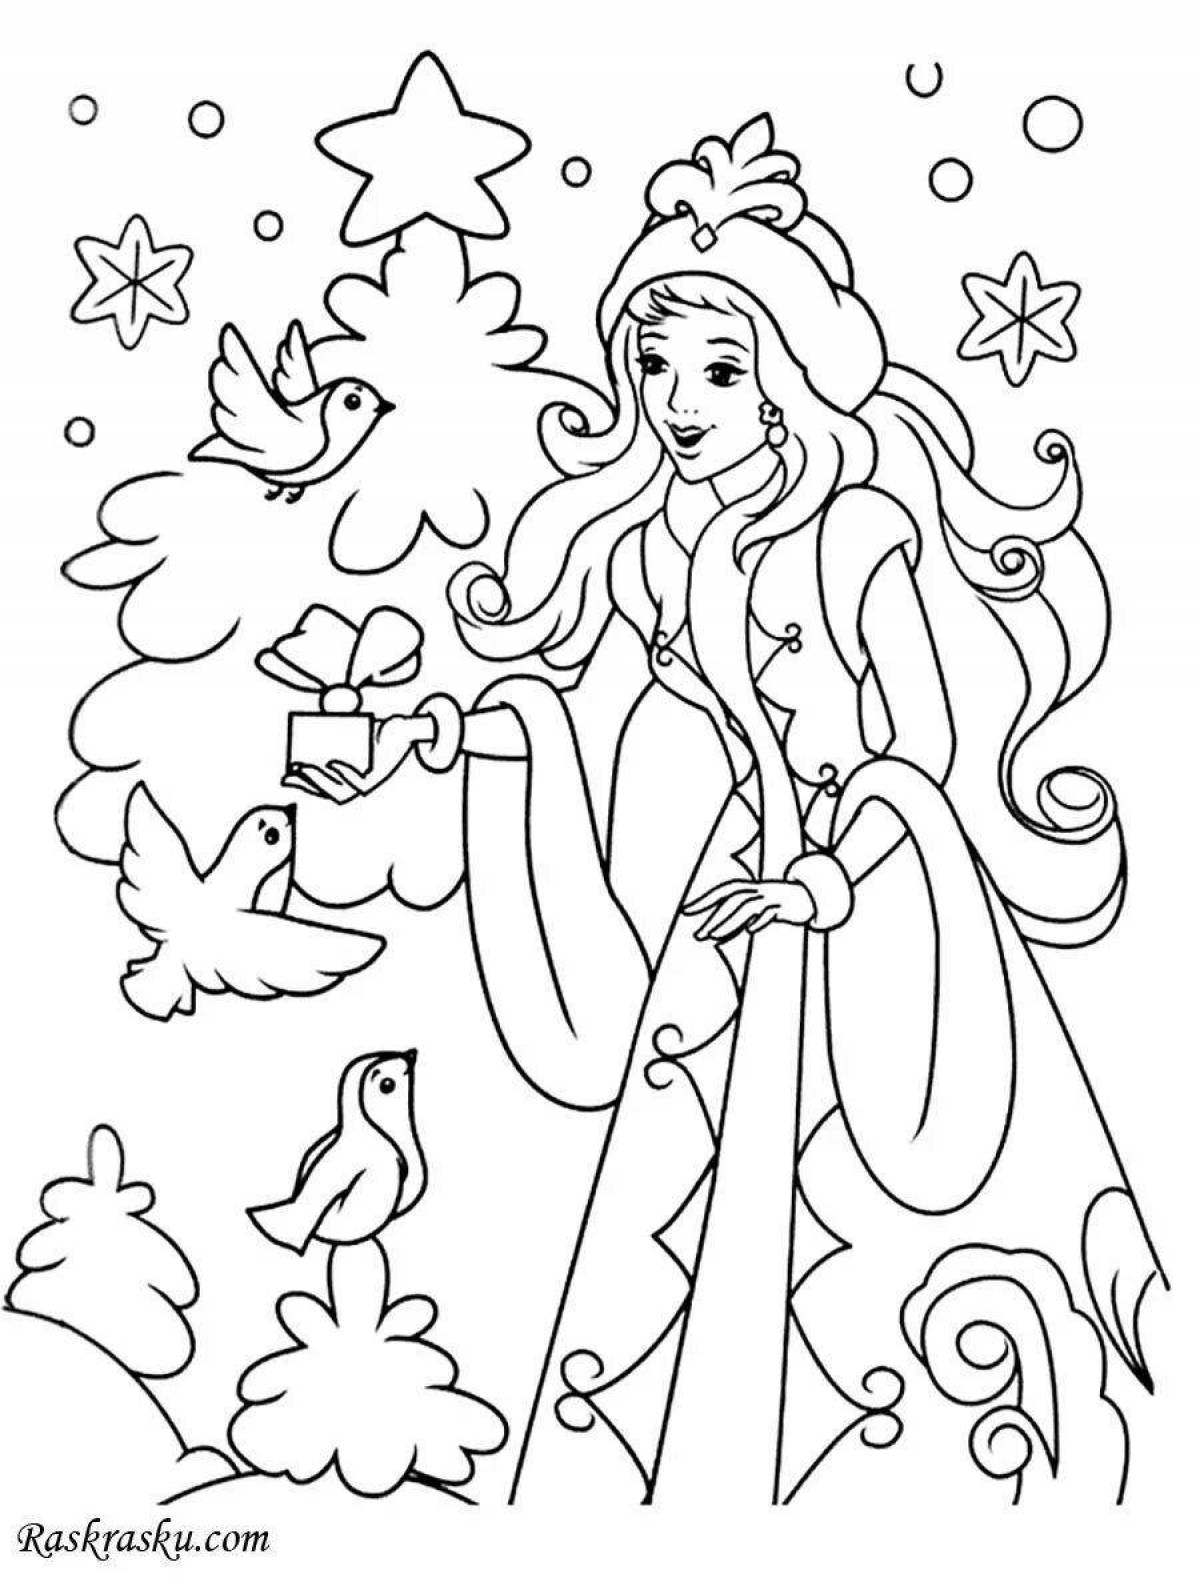 Cute snow maiden coloring book for girls